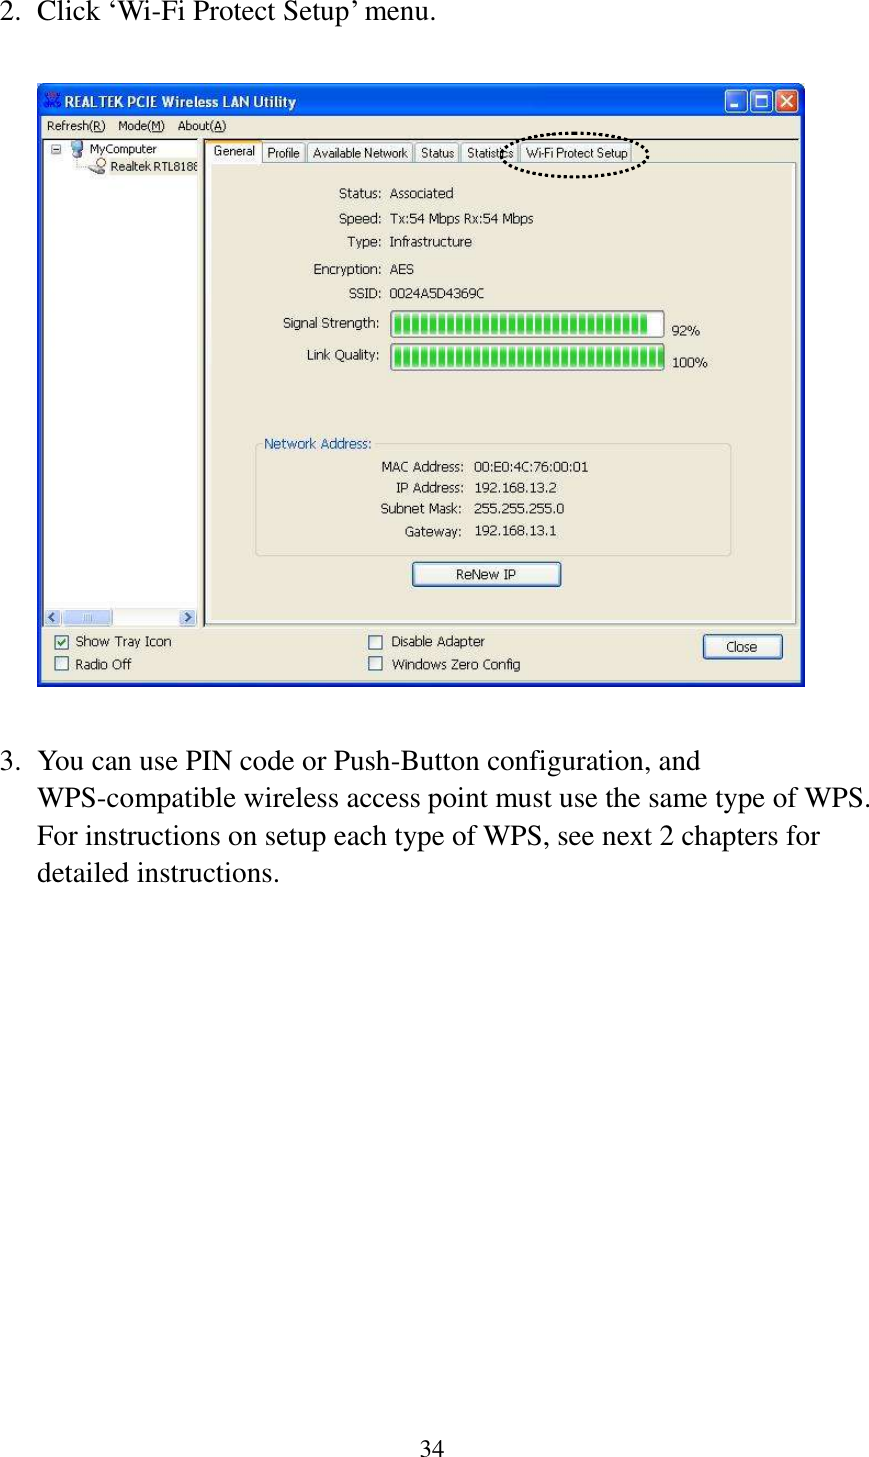 34  2. Click ‘Wi-Fi Protect Setup’ menu.    3. You can use PIN code or Push-Button configuration, and WPS-compatible wireless access point must use the same type of WPS. For instructions on setup each type of WPS, see next 2 chapters for detailed instructions.  